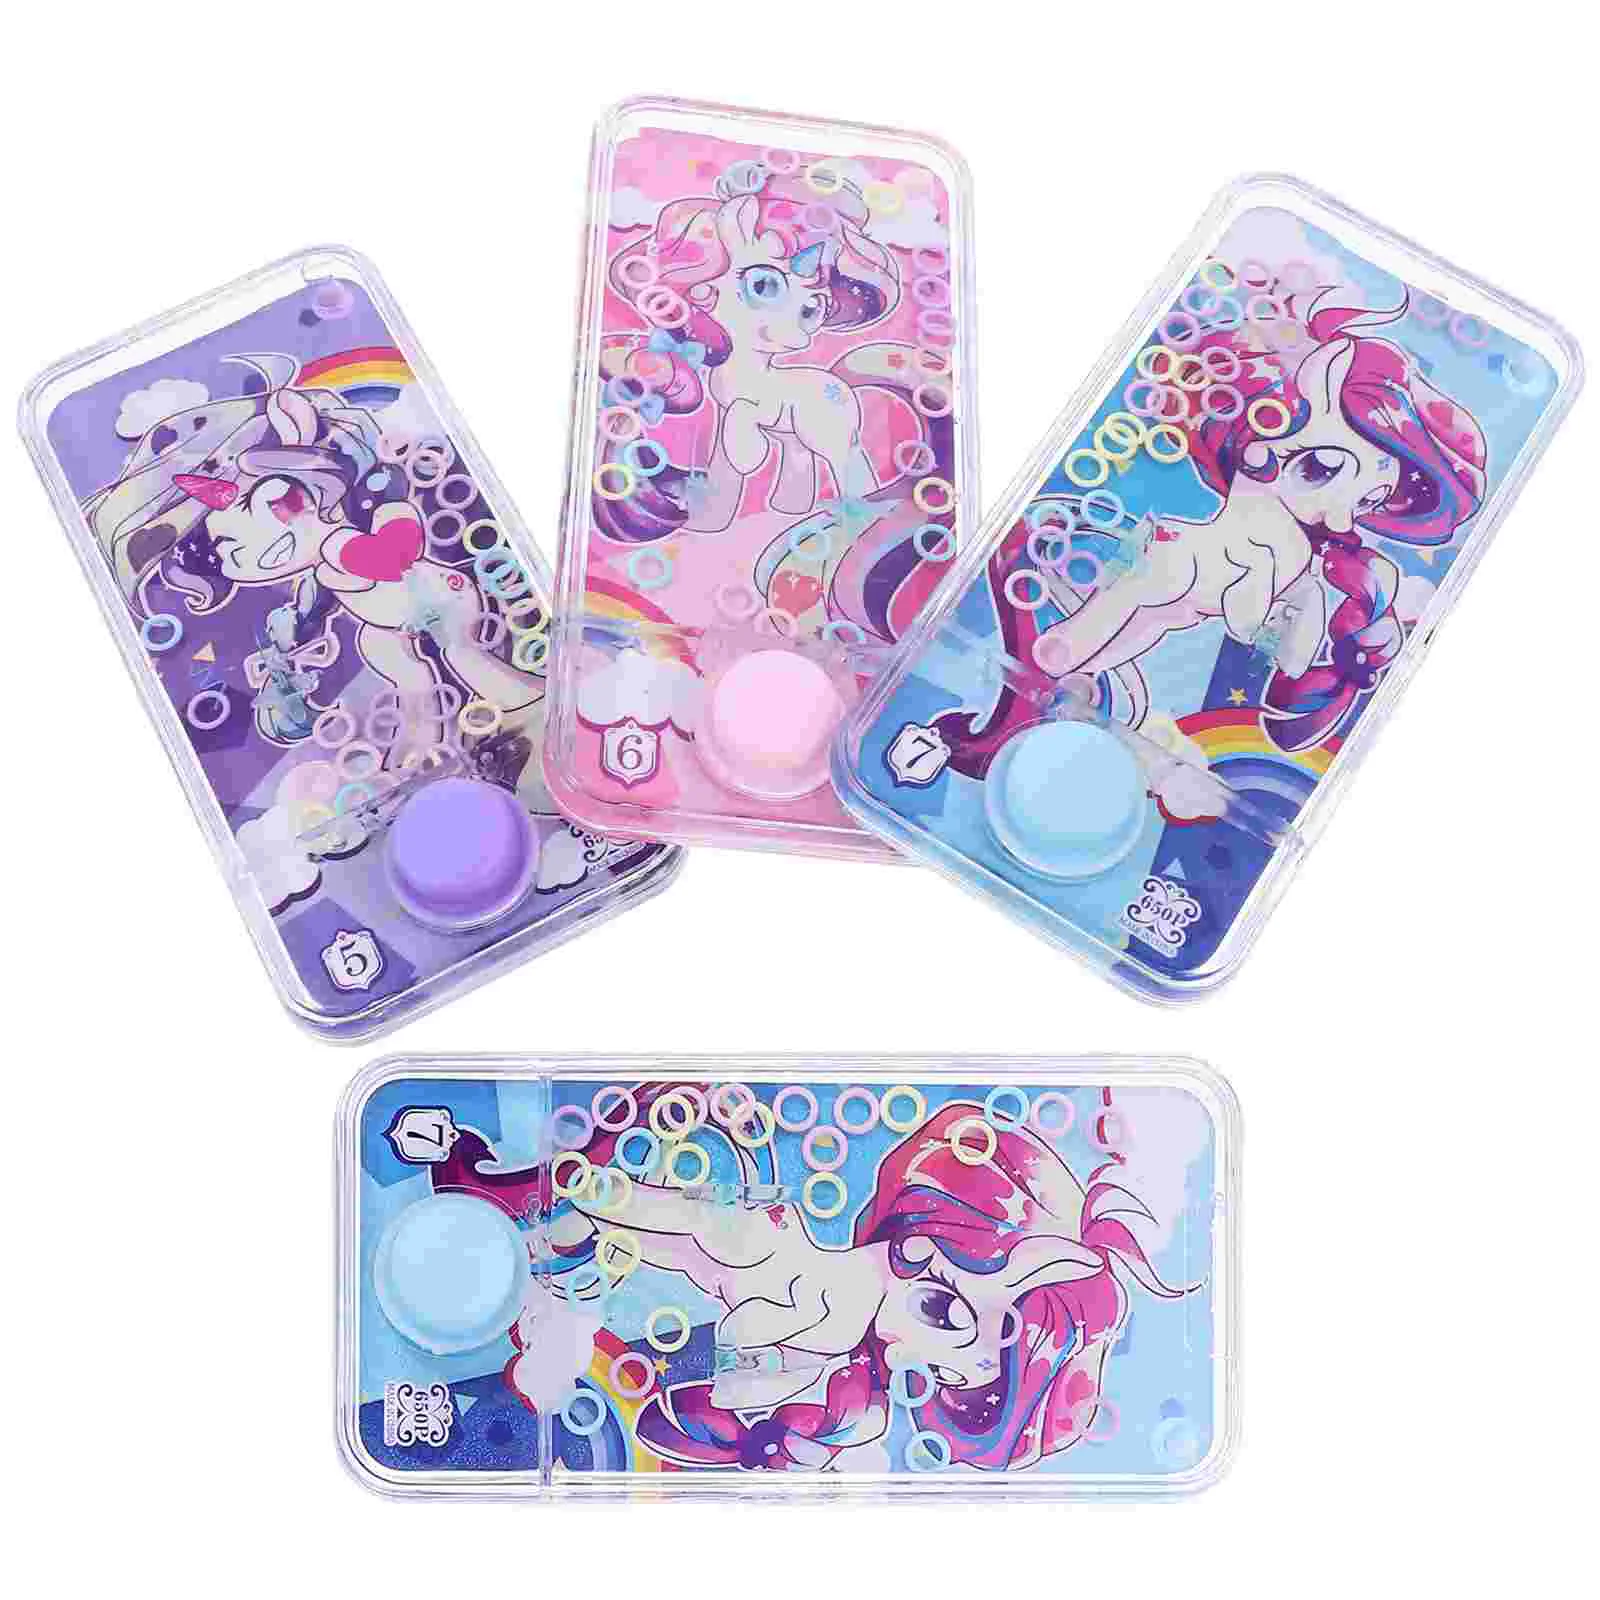 

4 Pcs Water Ring Toy Handheld Game Travel Games Toss Kids Educational Toys Essentials Puzzle Unicorn